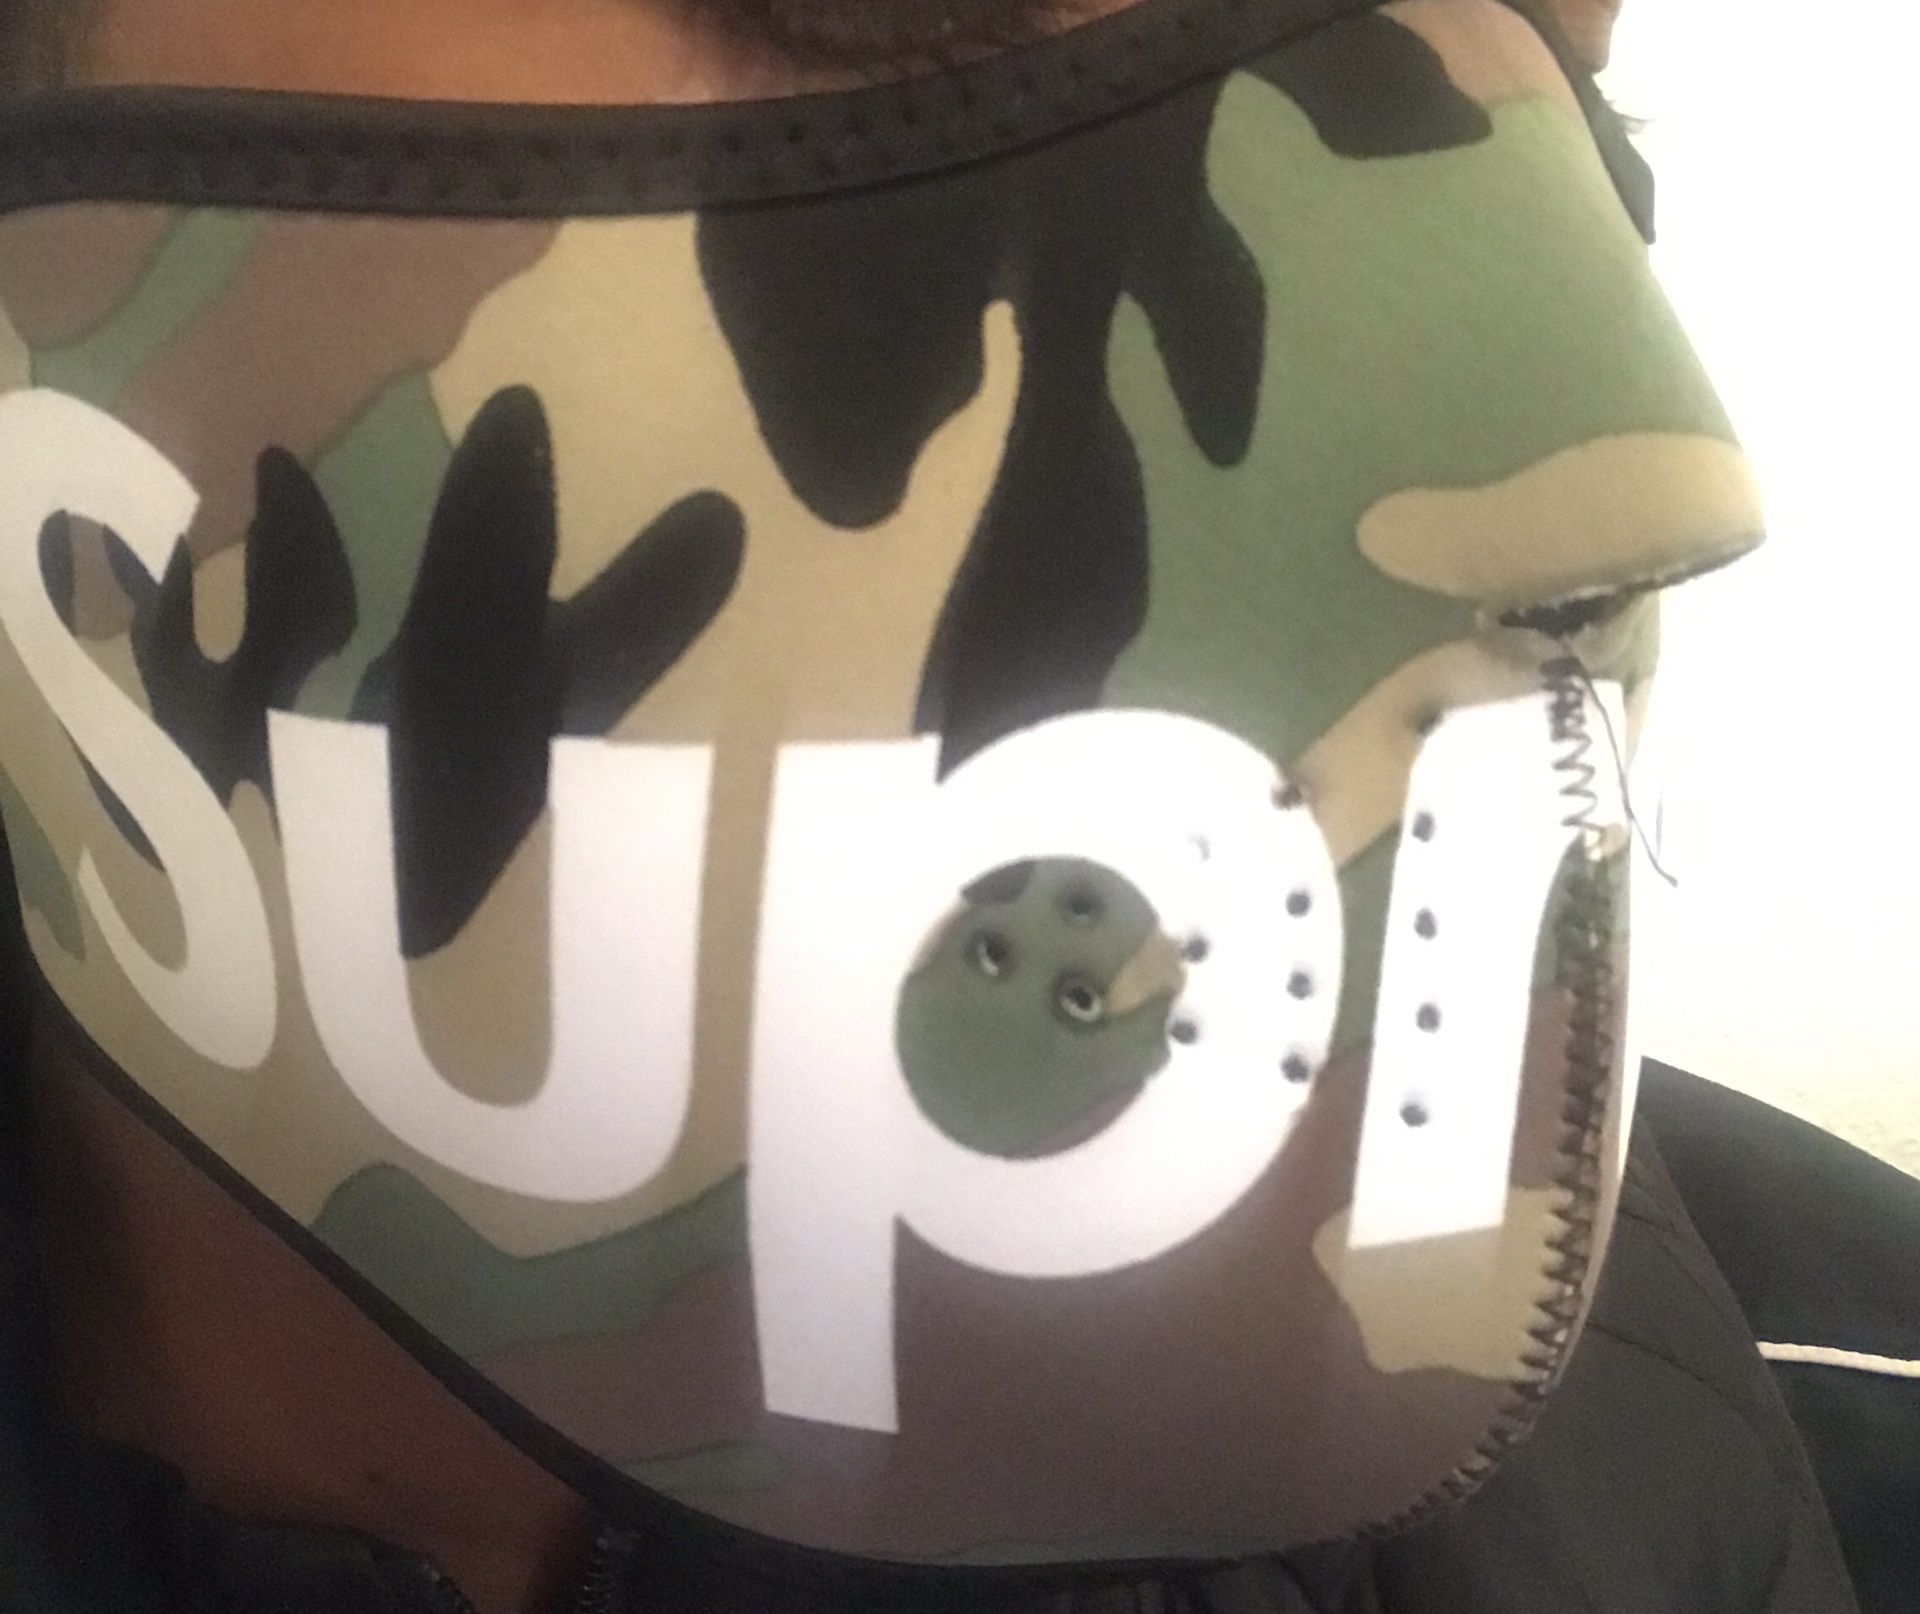 Red “Supreme” Ski Mask Good Condition for Sale in Hopkins, SC - OfferUp